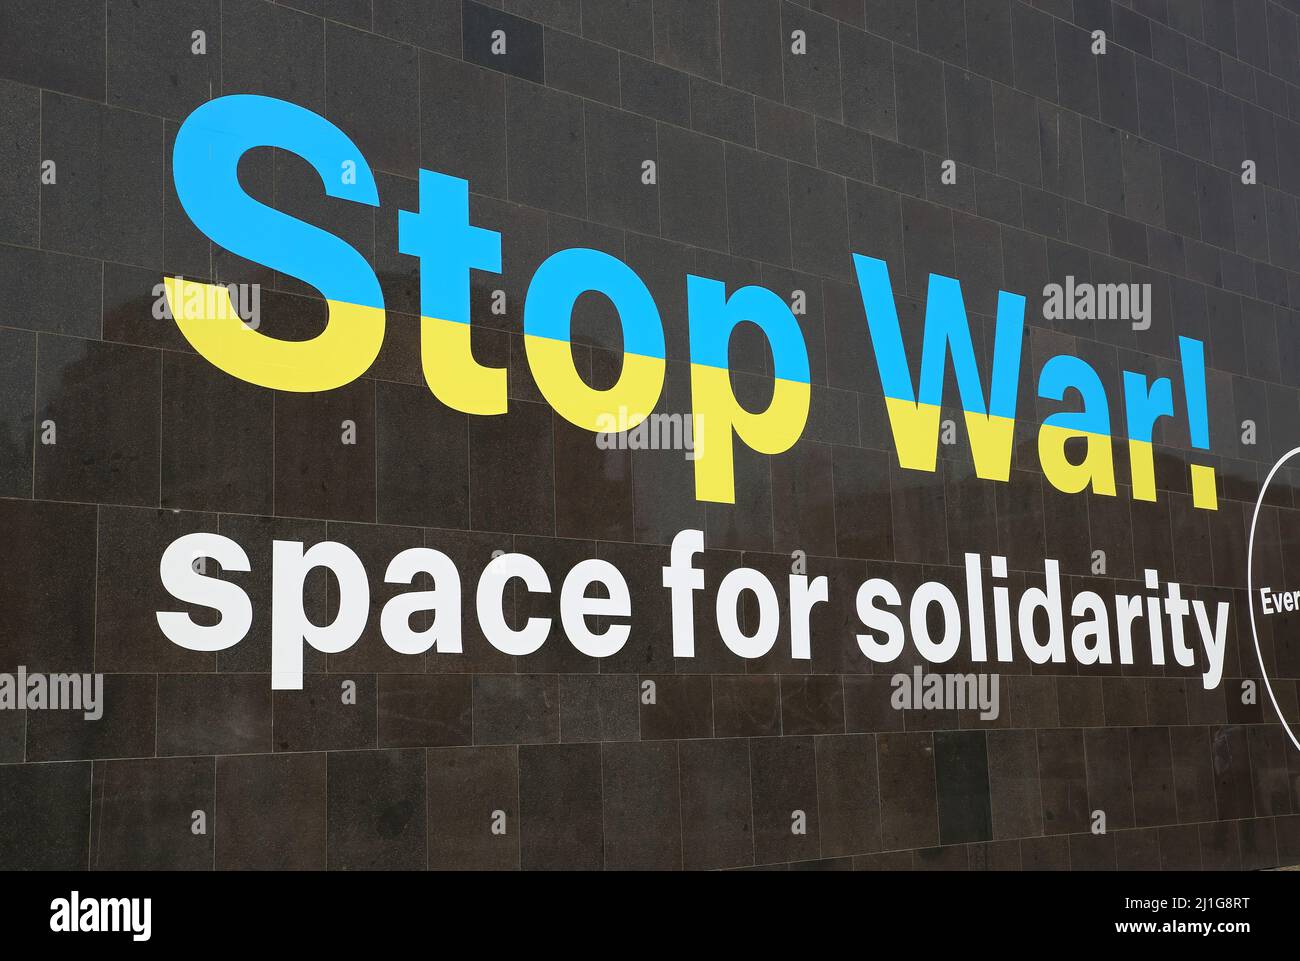 Düsseldorf (K20 Kunstsammlung), Germany - March 23. 2022: View on museum wall with text stop war as sign for solidarity for ukrainians Stock Photo